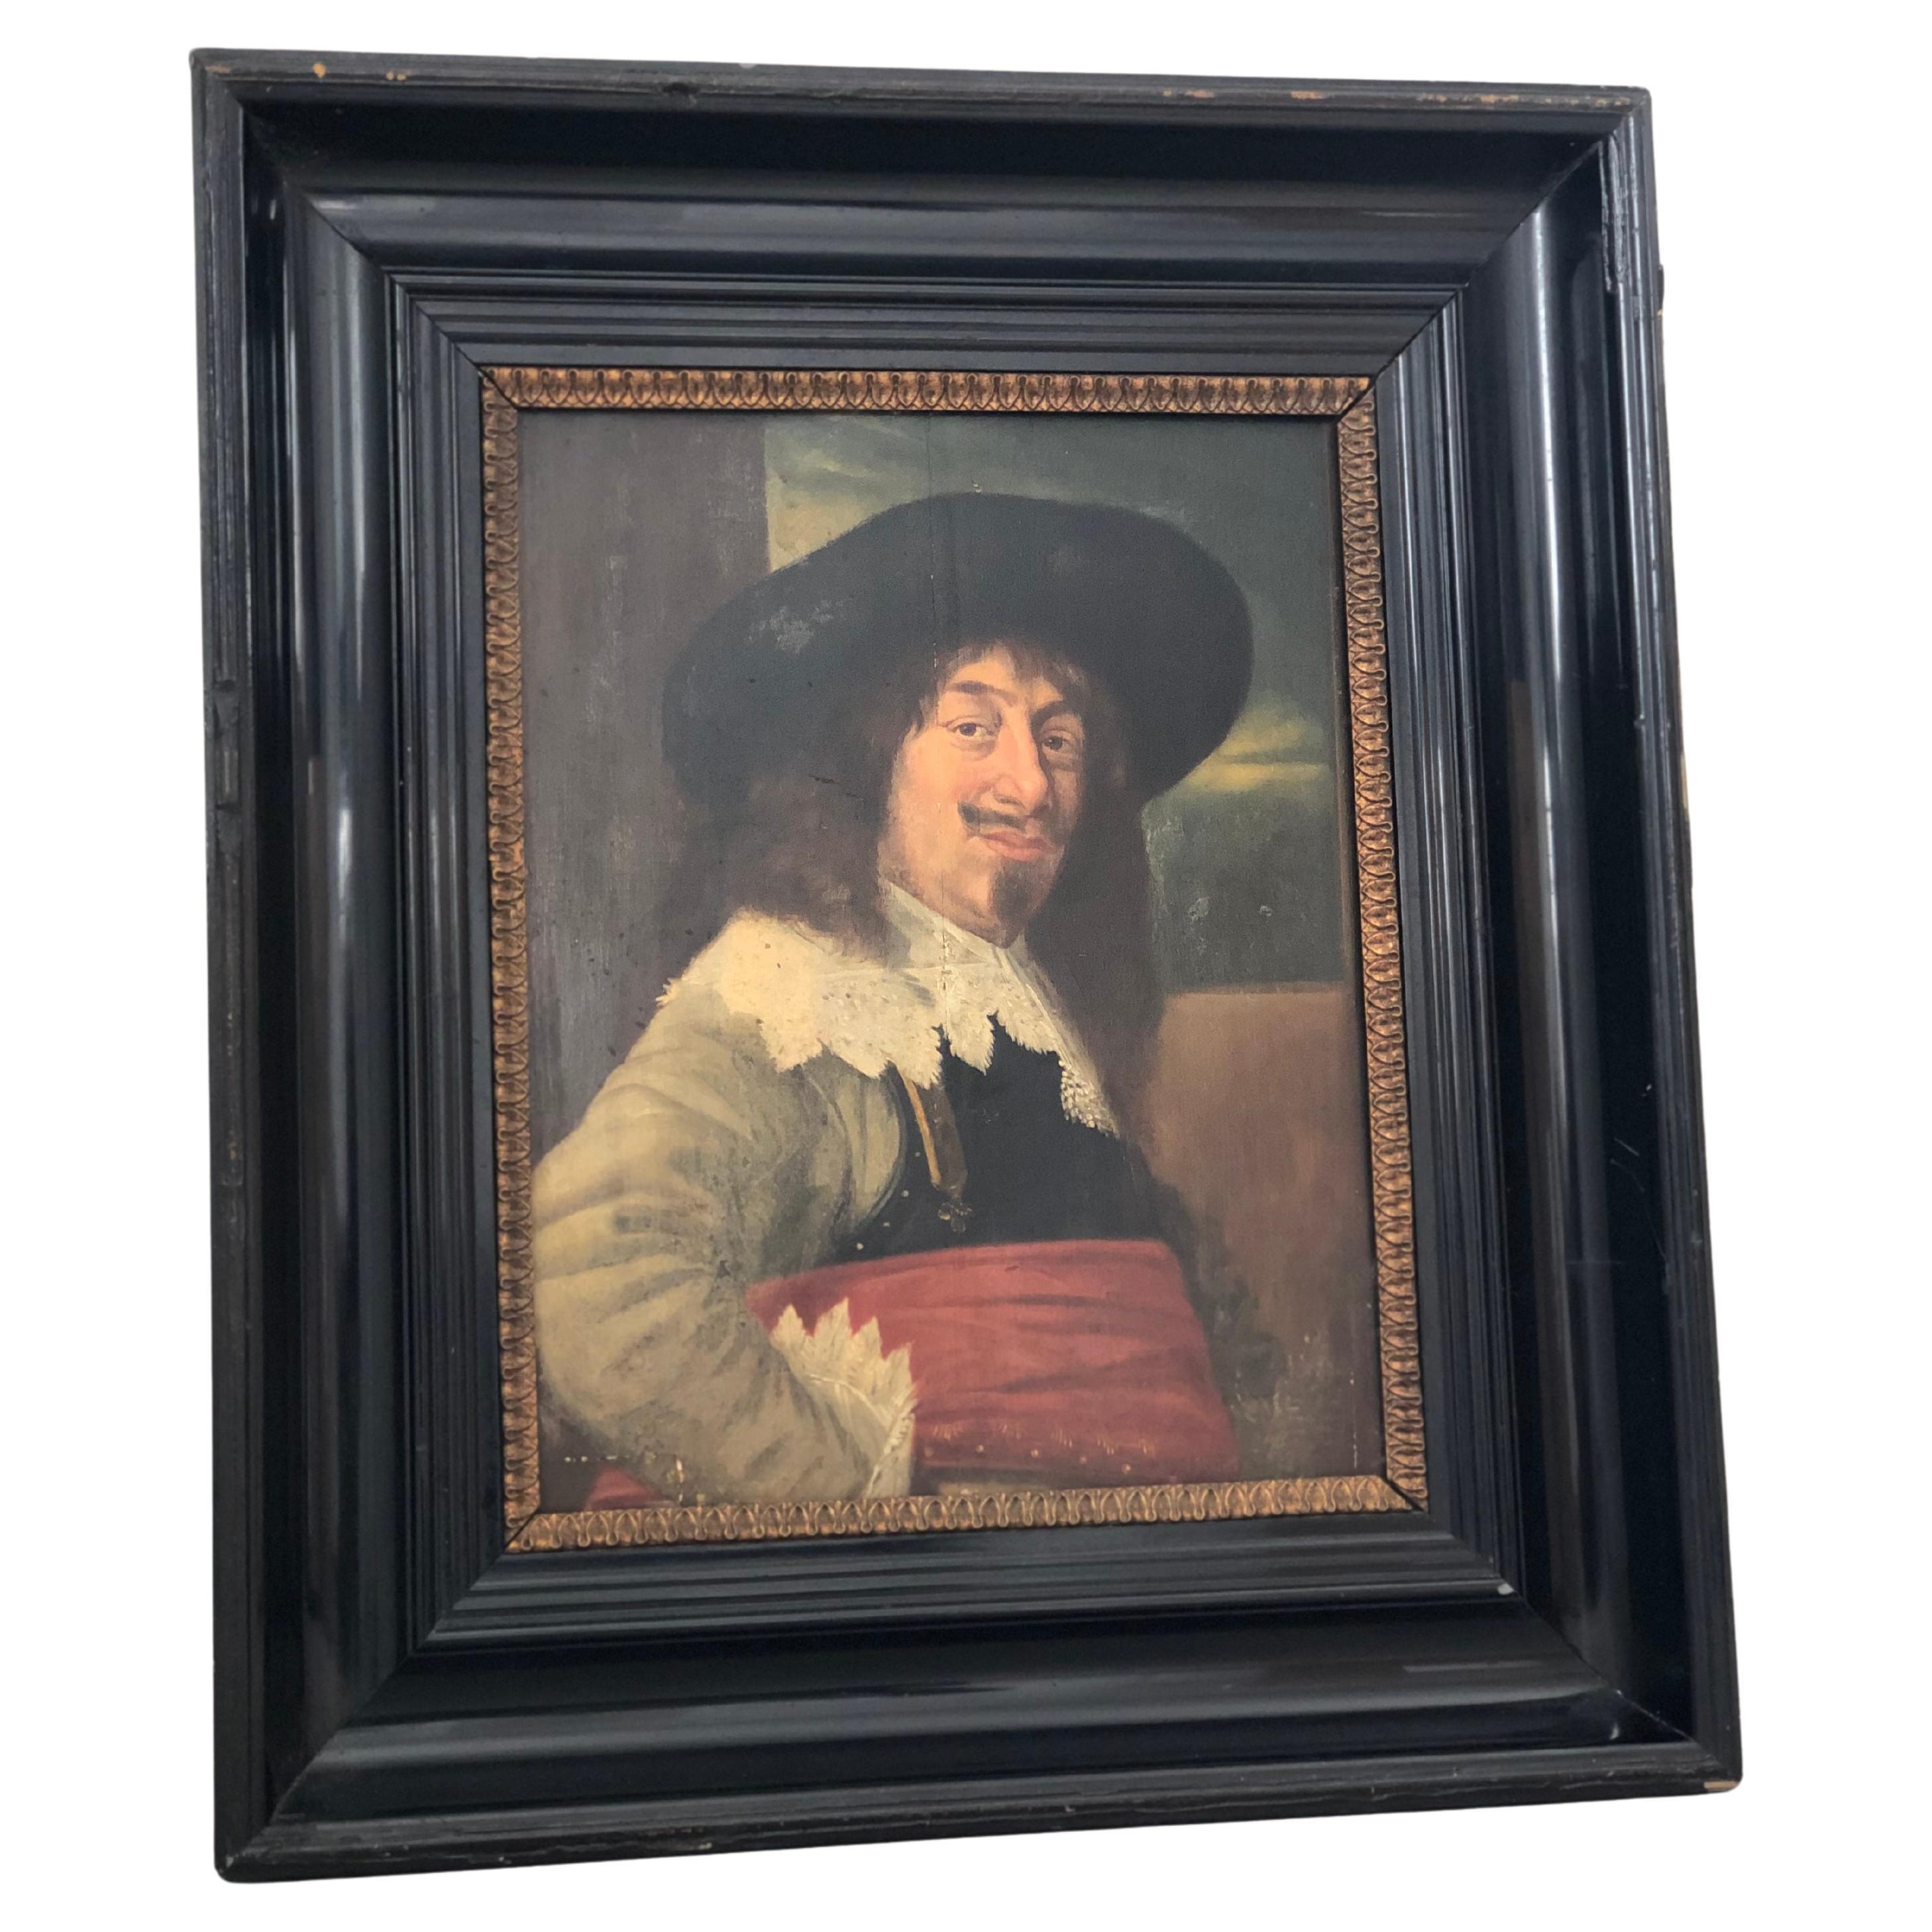 Late 19th Century Oil Painting of a Noble Man from the Dutch Golden Age Era